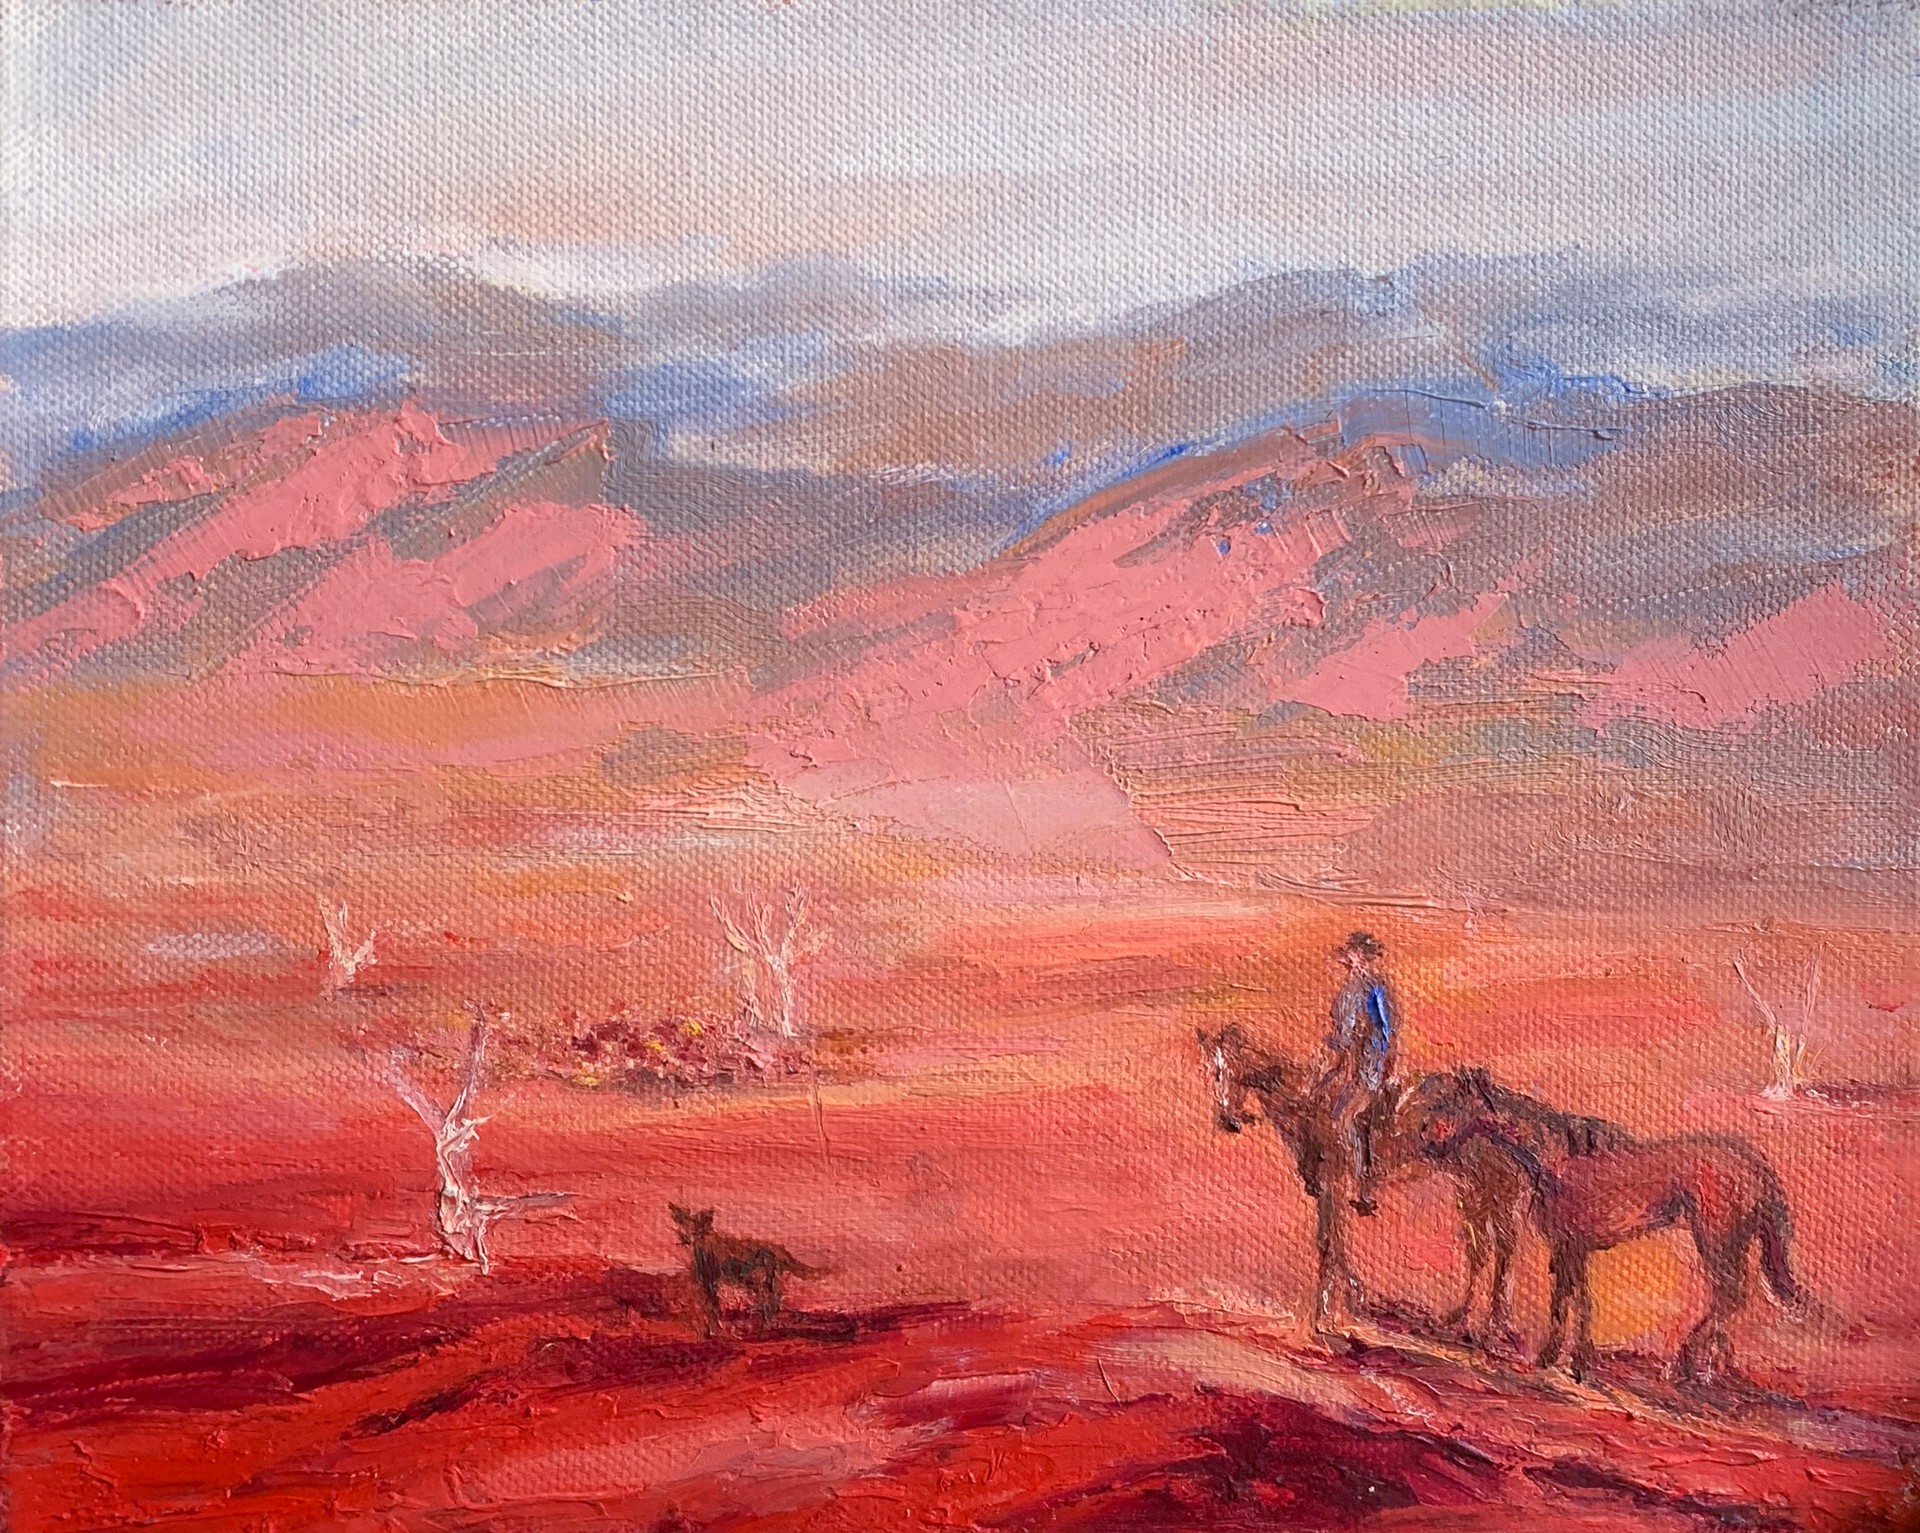 Northern Territory Drover by Lorraine Hamilton